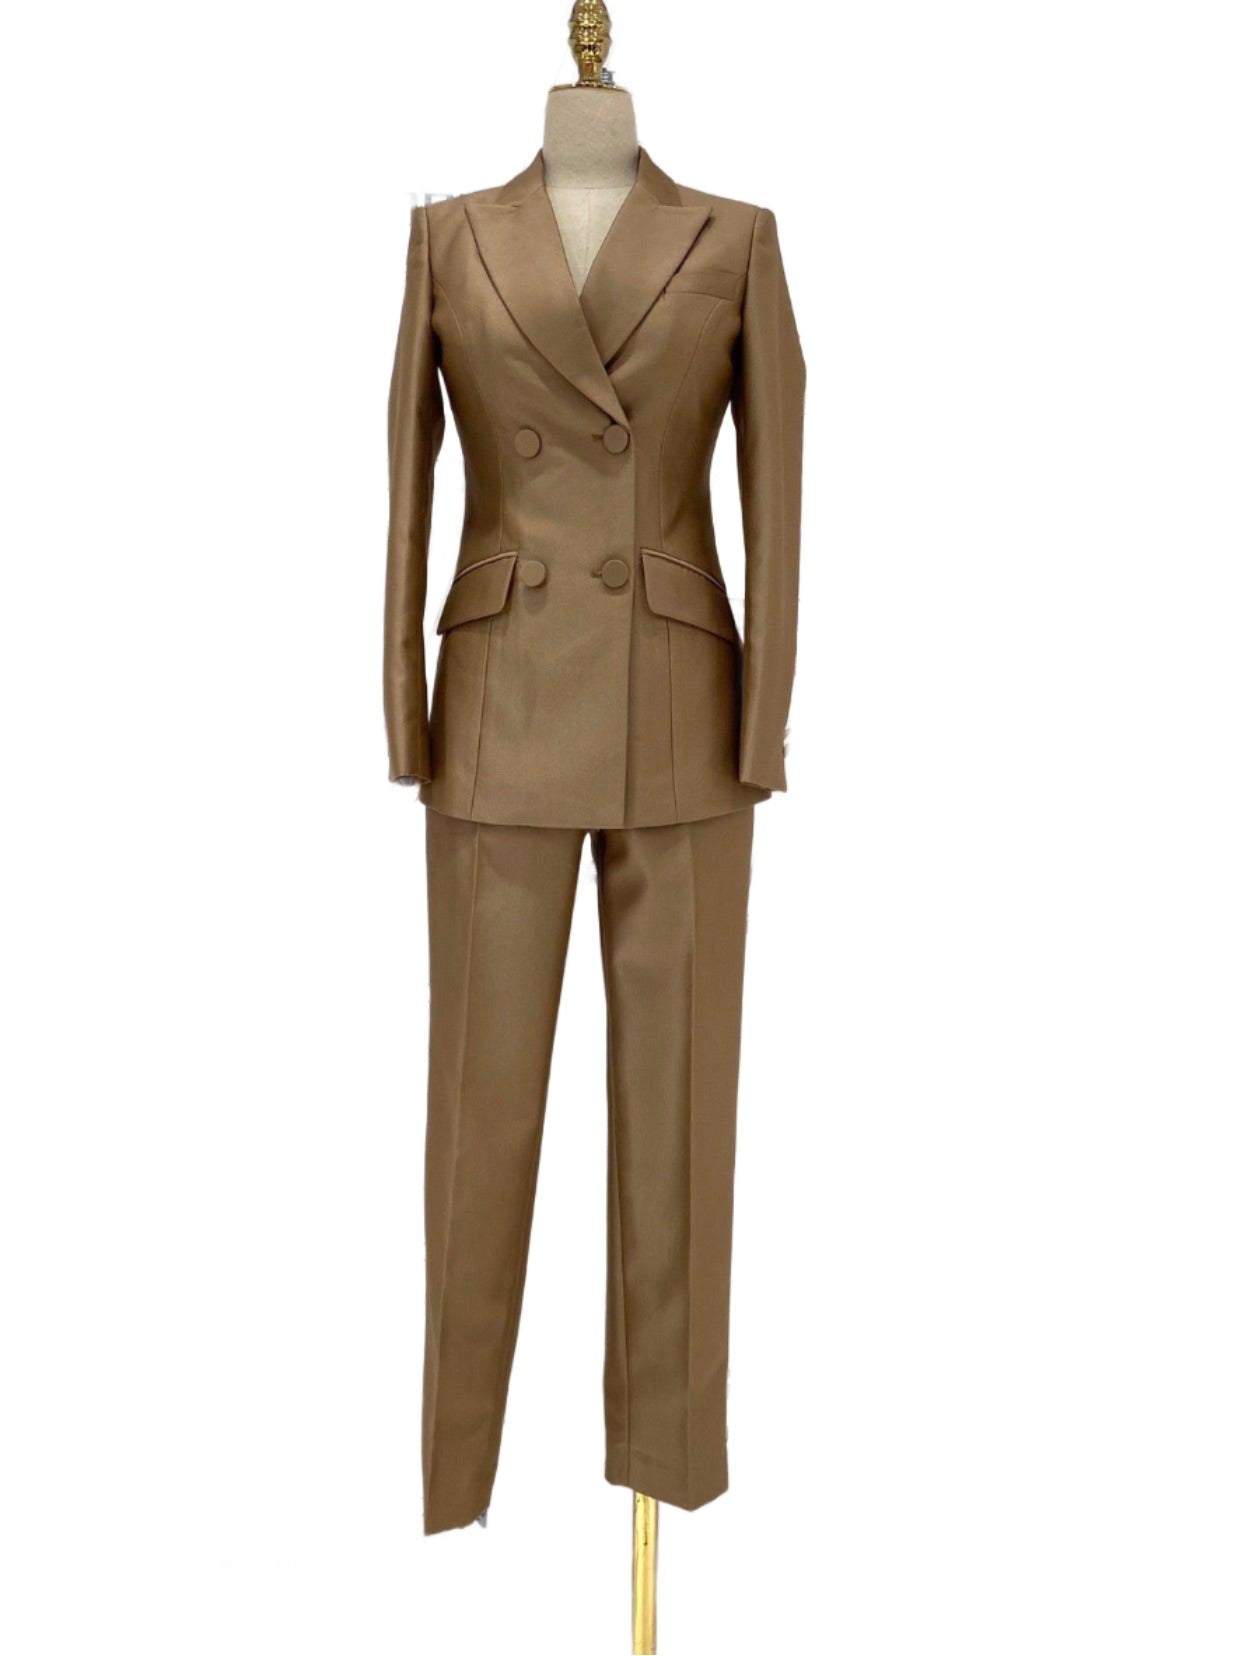 Khaki Worsted Wool Double-Breasted Slim Fit Pant Suit - Pantsuit - Guocali